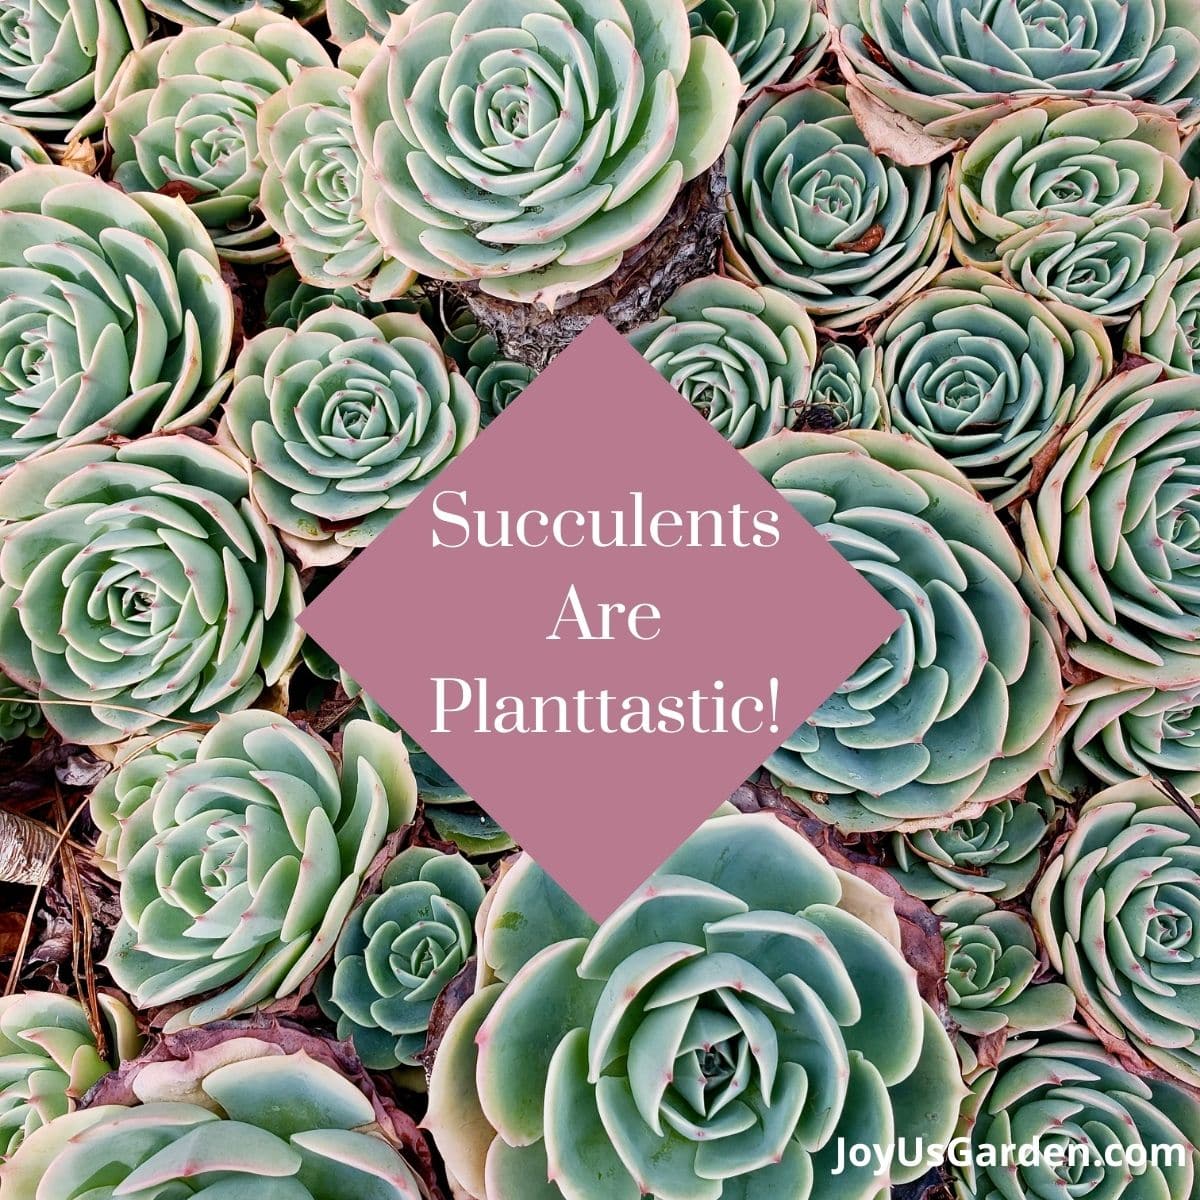 succulents used as background pof image plant quote reads Succulents Are Planttastic! 